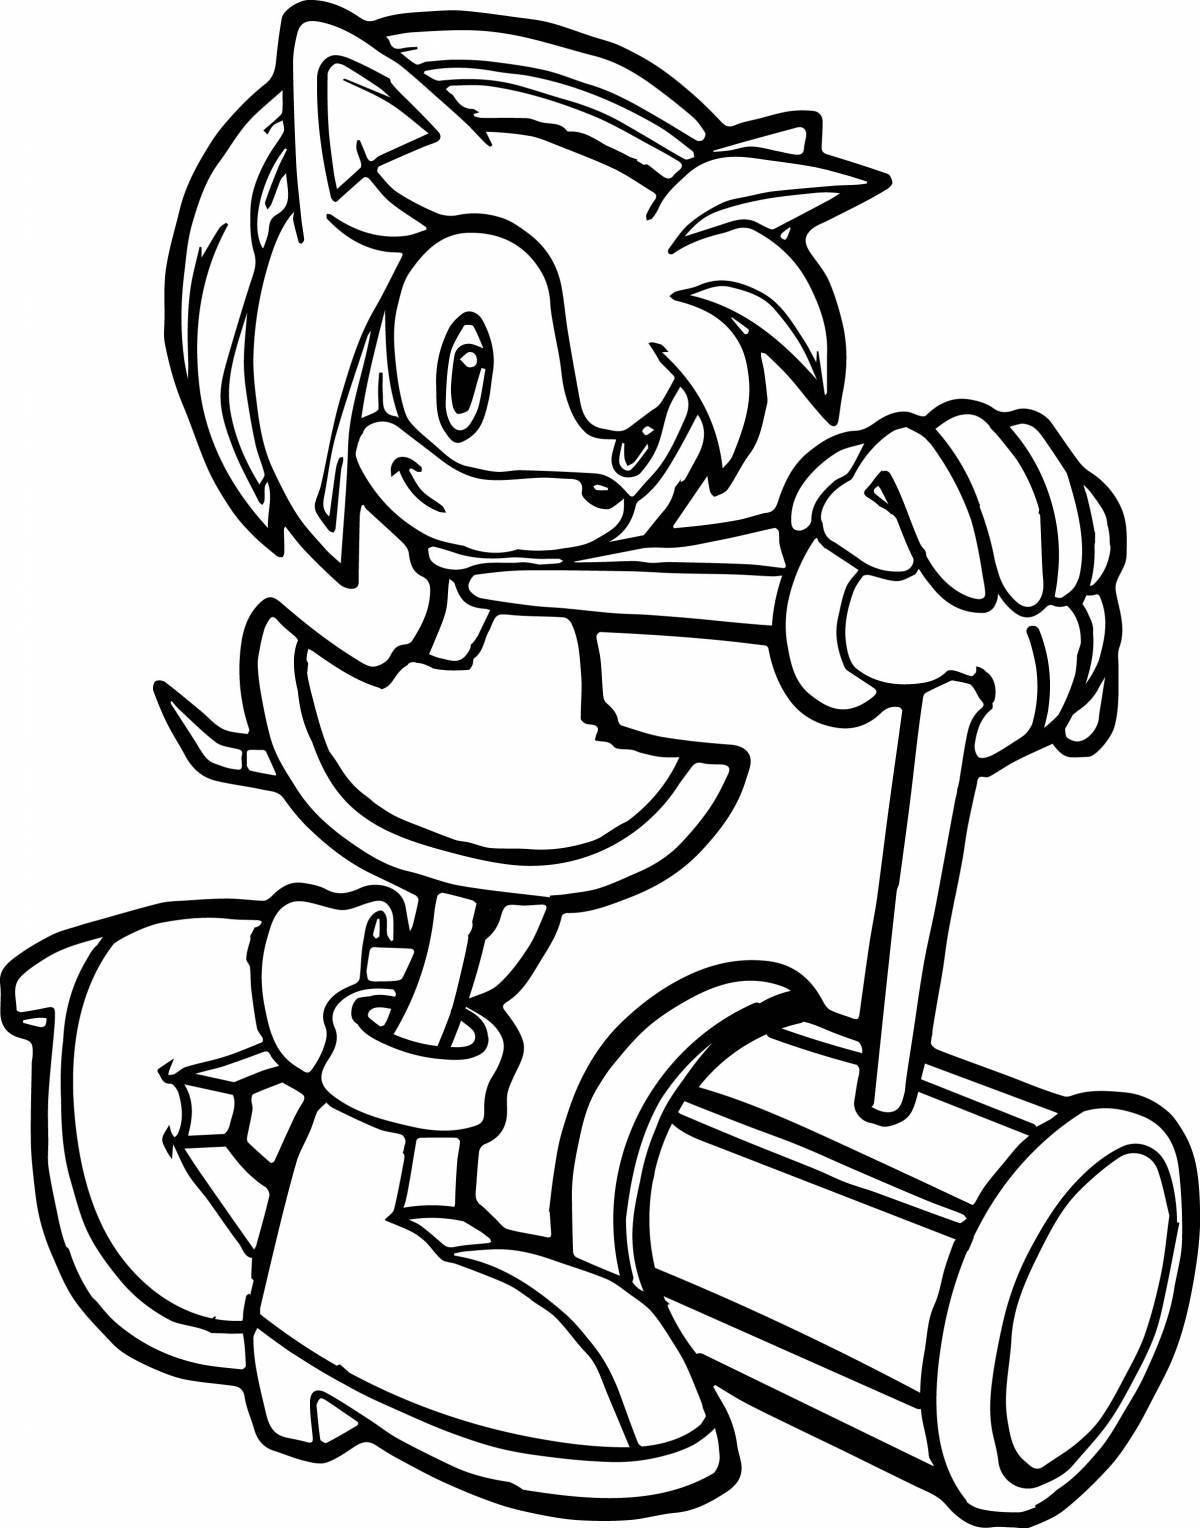 Coloring book shining amy rose